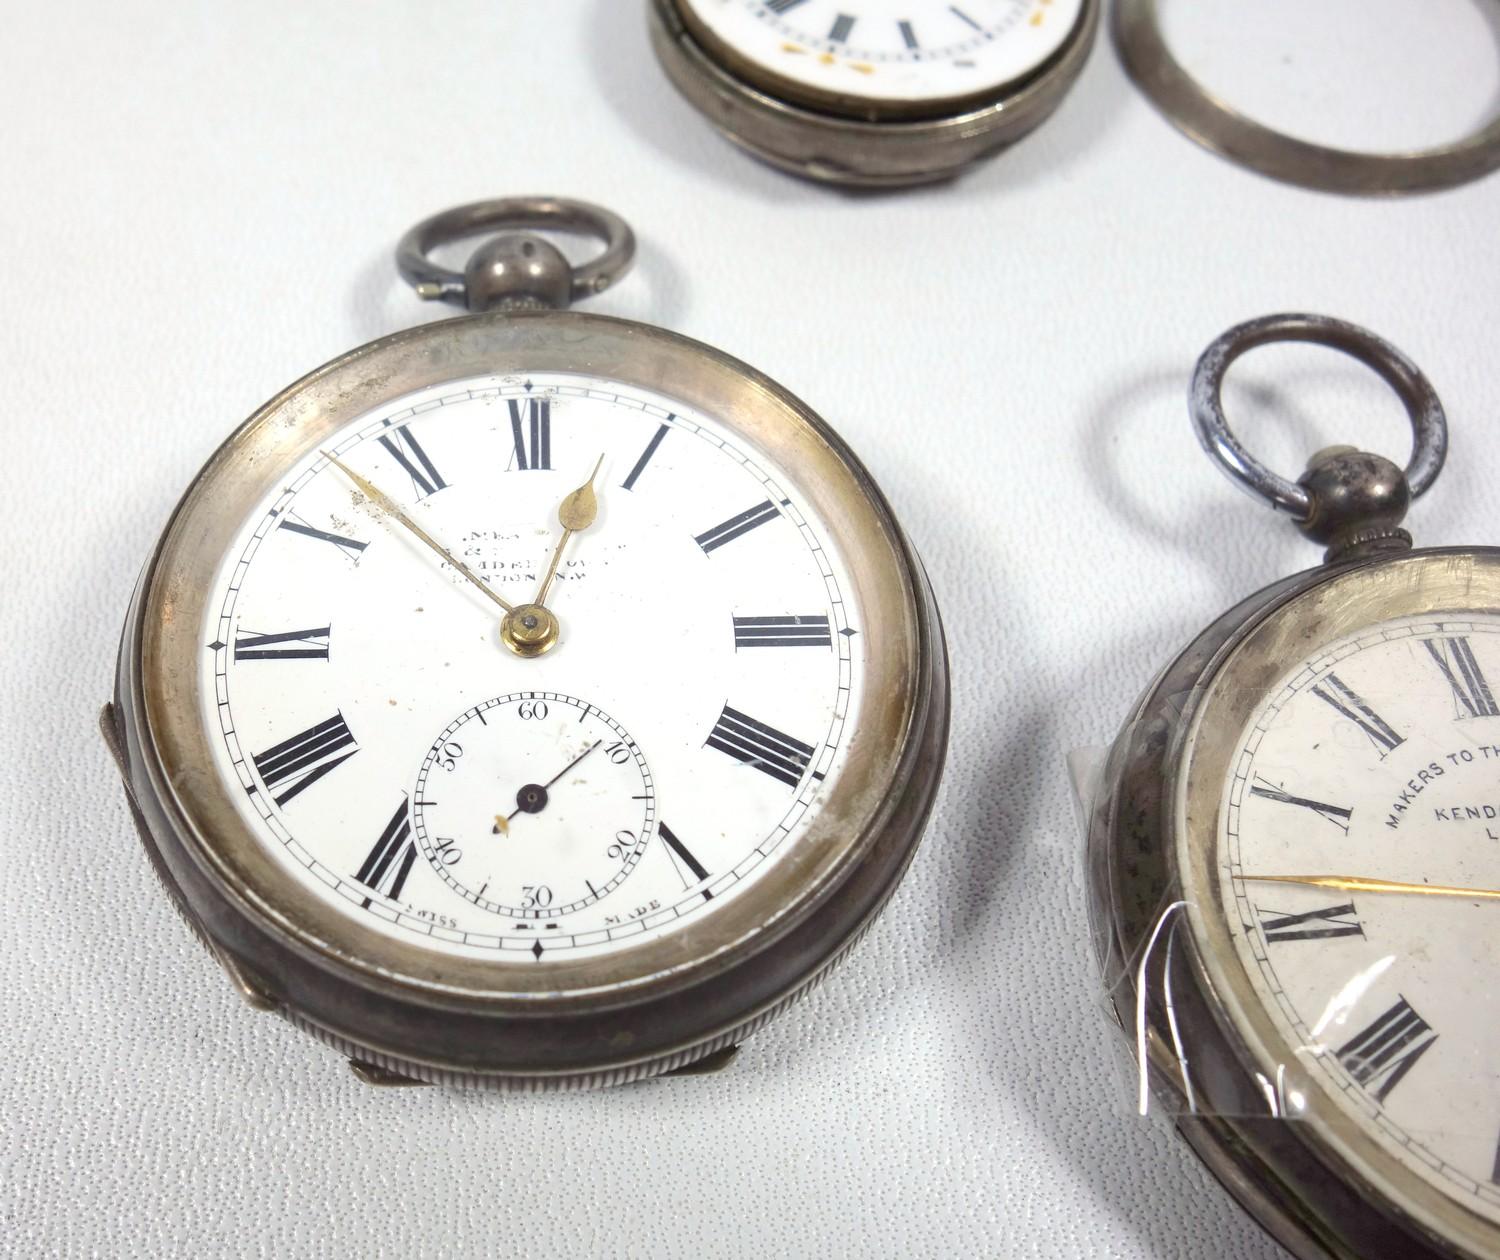 19TH CENTURY SILVER SWISS OPEN FACED POCKET WATCH WITH A WHITE ENAMELLED DIAL INSCRIBED, 'MAKERS - Image 4 of 6